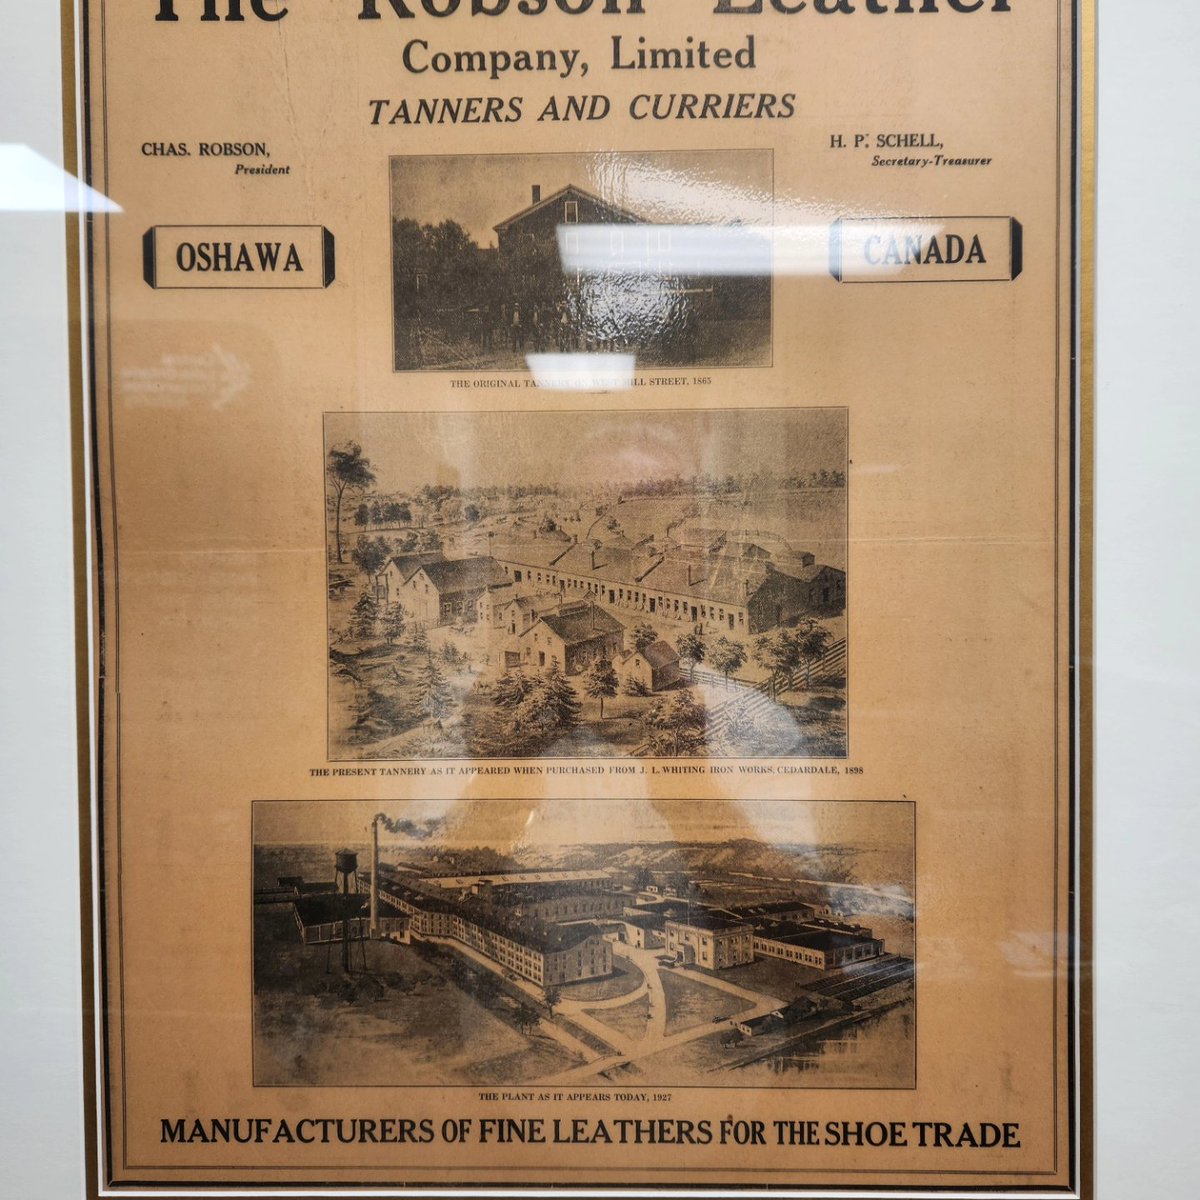 #CLOCA, now overseeing the management & protection of the area's natural watershed, was in the early 1800s home to the #CedarDaleWorks, making farm implements for 40 years. It then became #RobsonLeather serving as a major employer for almost 100 years, closing in 1977. #ttotr